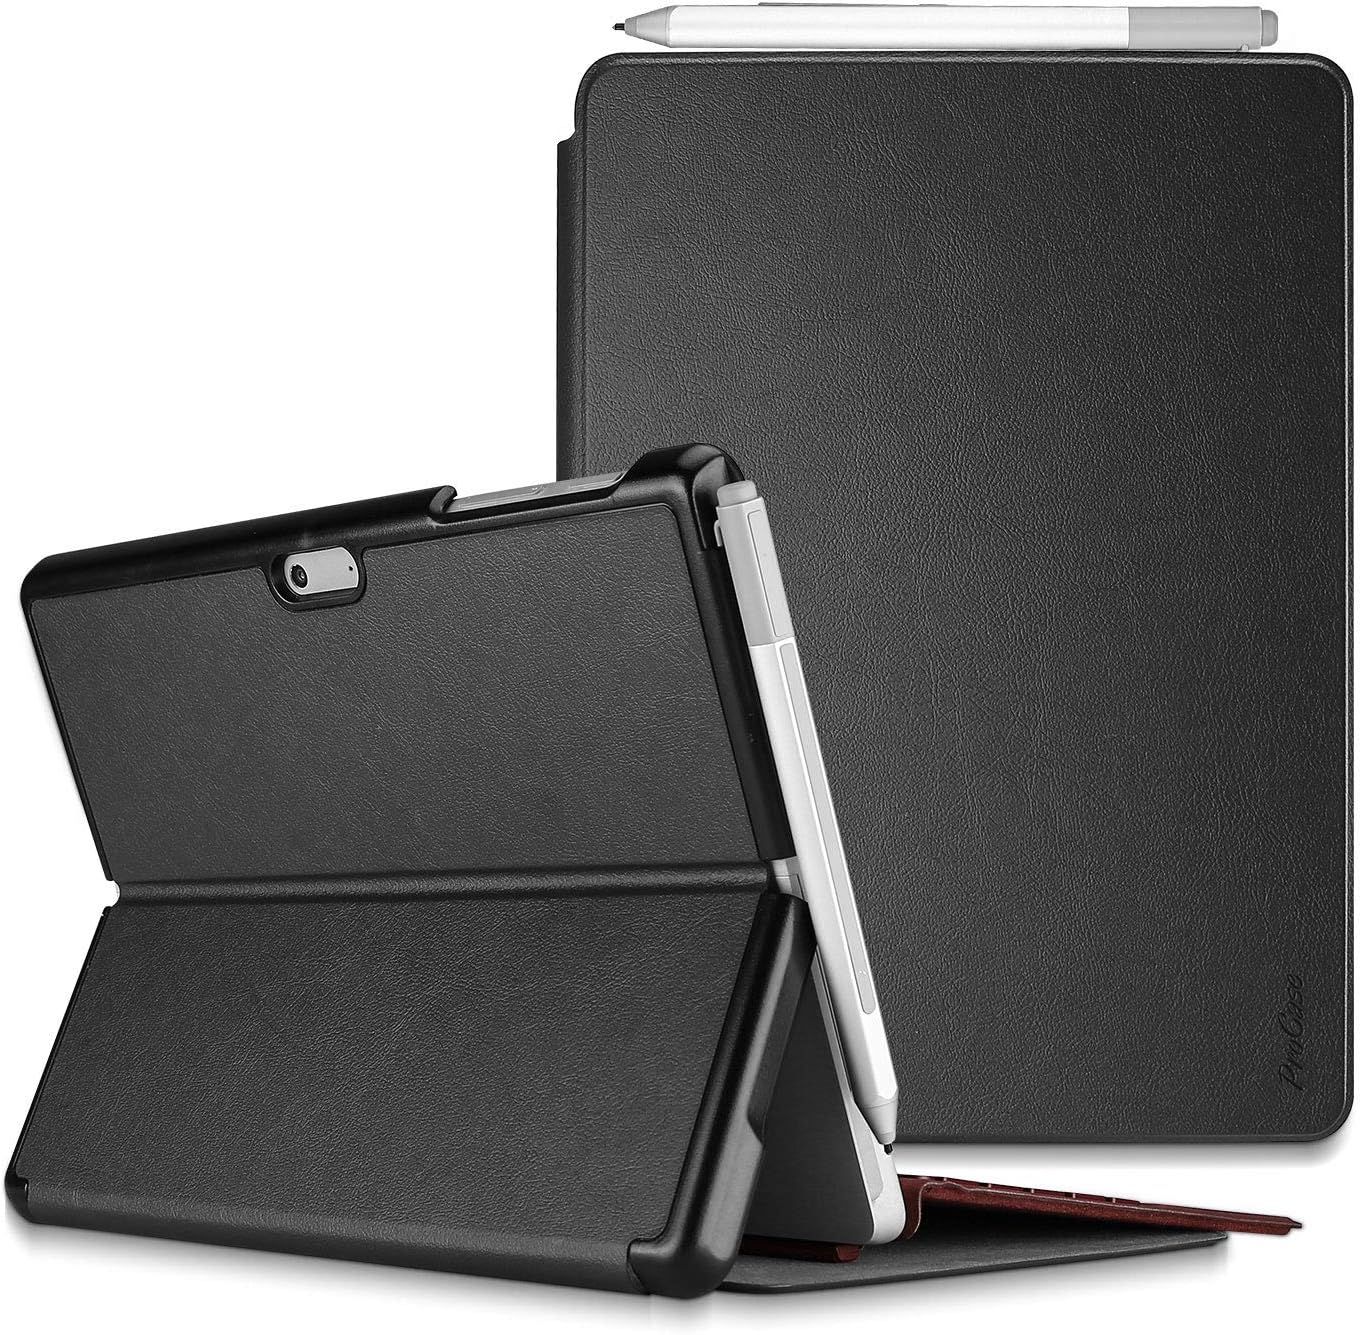 ProCase Microsoft Surface Pro 7 Plus / Pro 7 / Pro 6 / Pro 5 /Pro 2017 / Pro 4 / Pro LTE Case, Slim Light Smart Cover Stand Case with Built-in Surface Pen Holder, Compatible with Surface Type Cover -Black